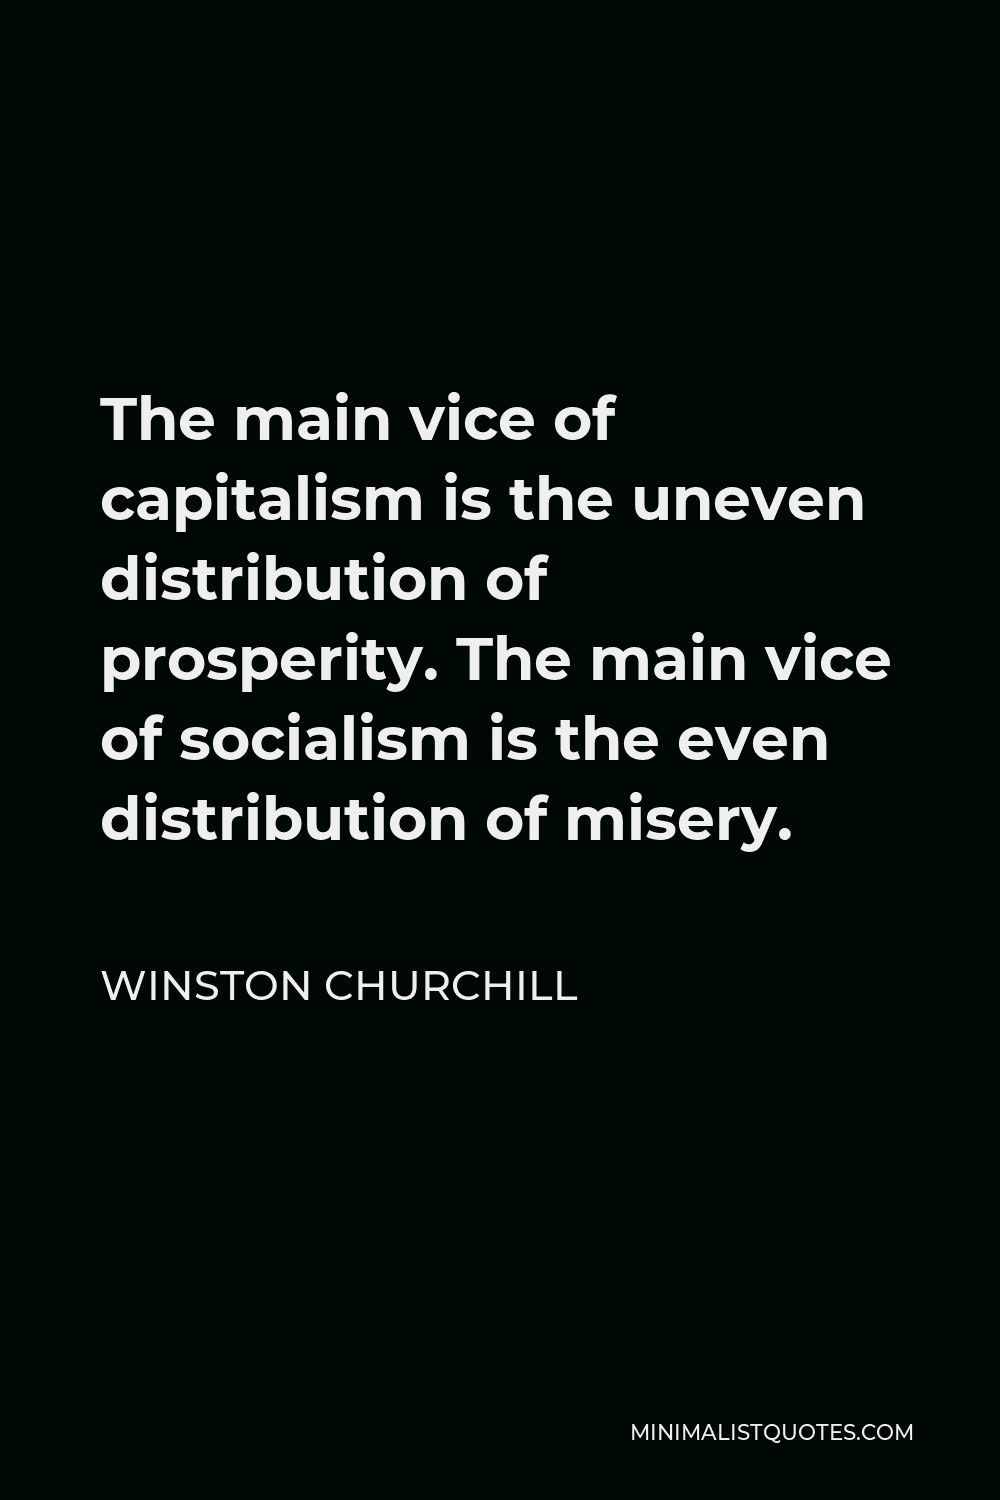 Winston Churchill Quote - The main vice of capitalism is the uneven distribution of prosperity. The main vice of socialism is the even distribution of misery.